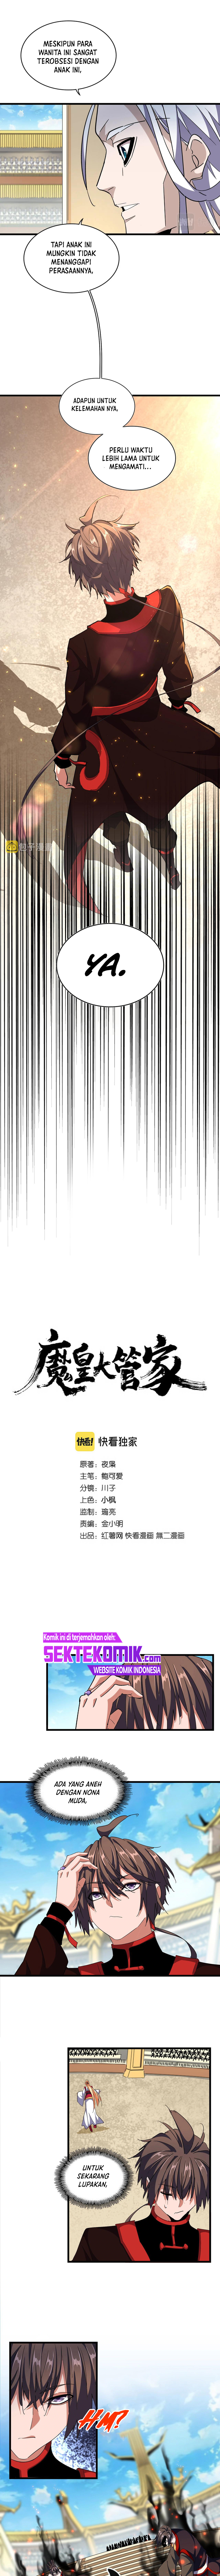 Magic Emperor Chapter 303 Image 1